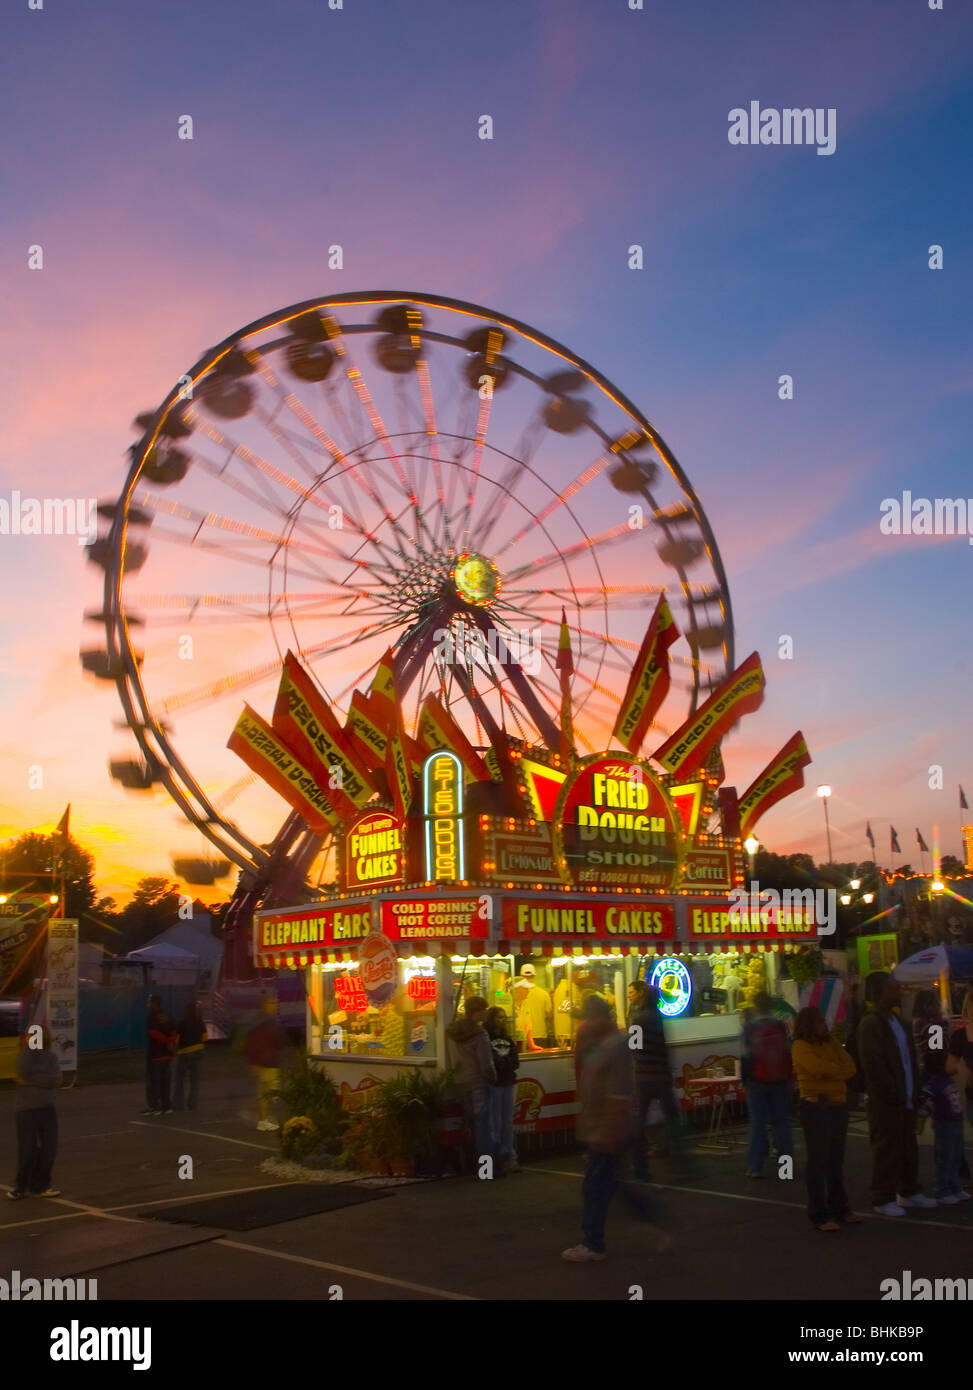 Ferris wheel and food stand at dusk, at the North Carolina State Fair in Raleigh Stock Photo